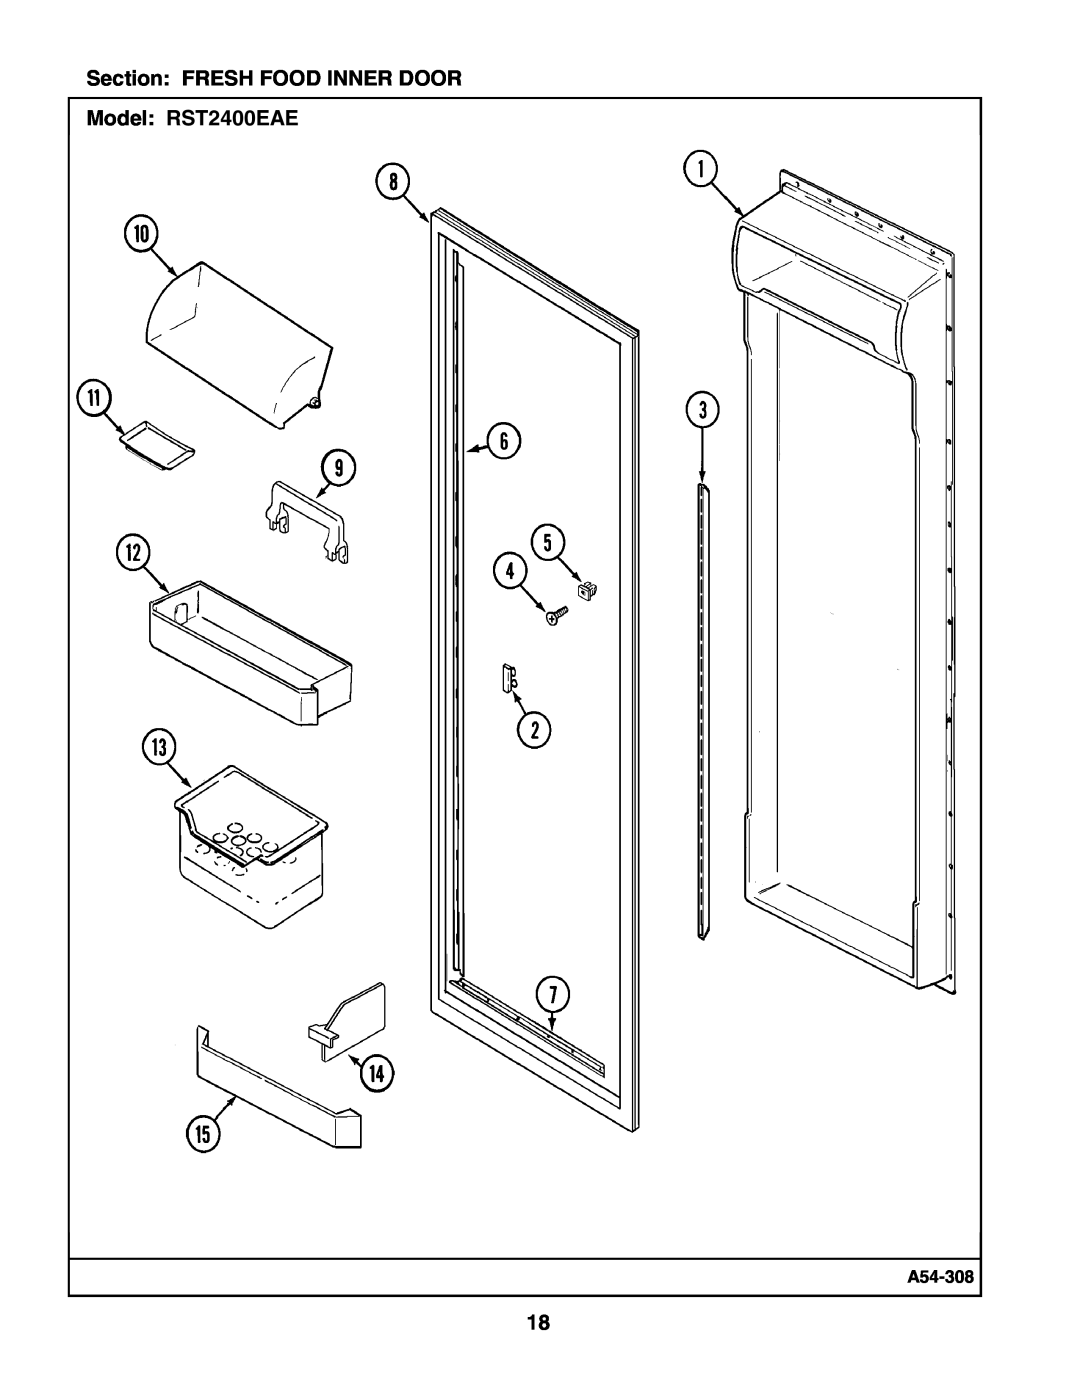 Maytag manual Section: FRESH FOOD INNER DOOR Model: RST2400EAE, A54-308 